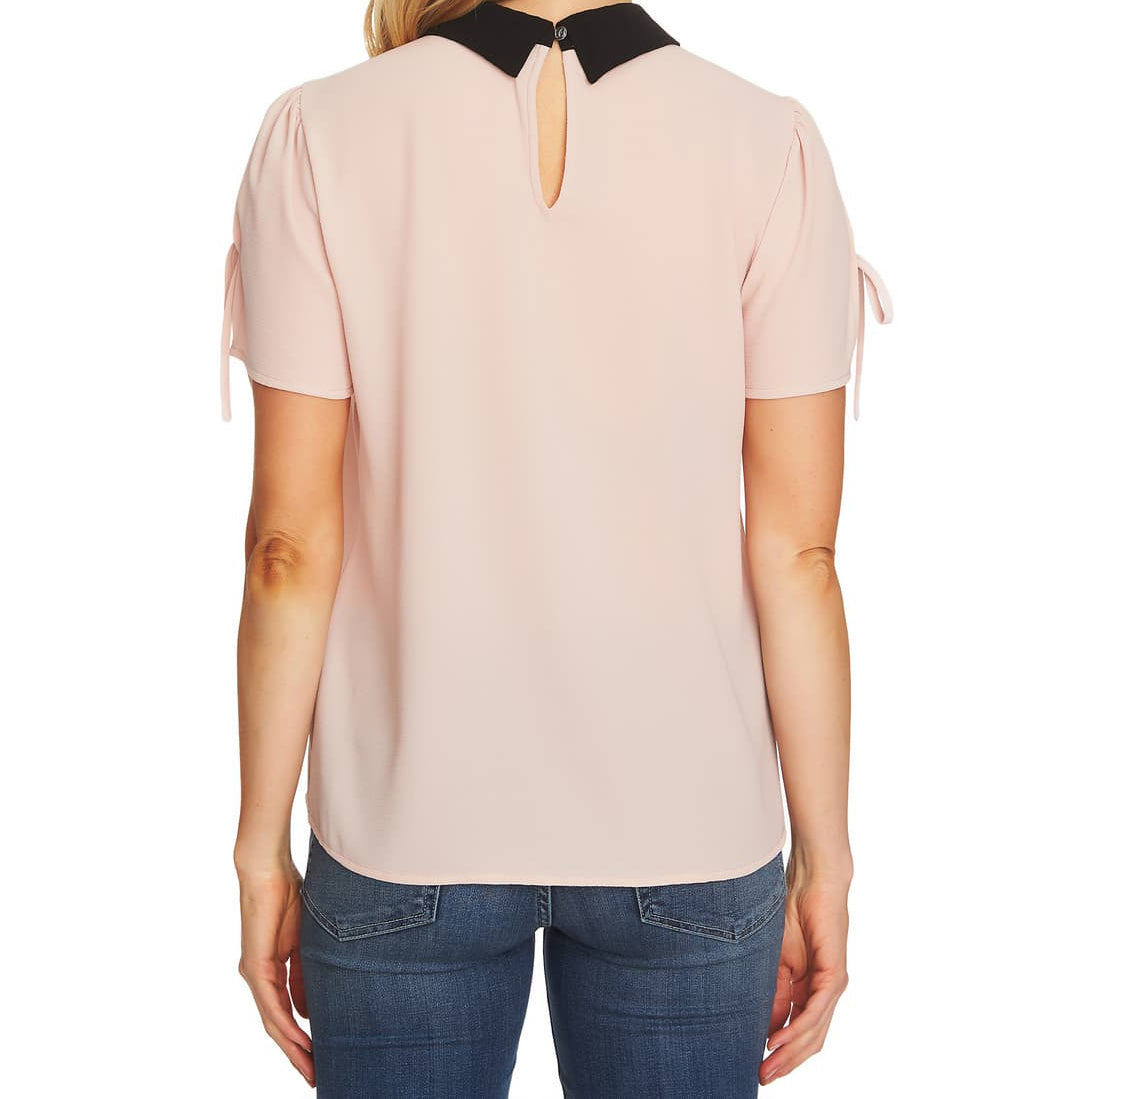 Cece Womens Tie Sleeve Collared Blouse